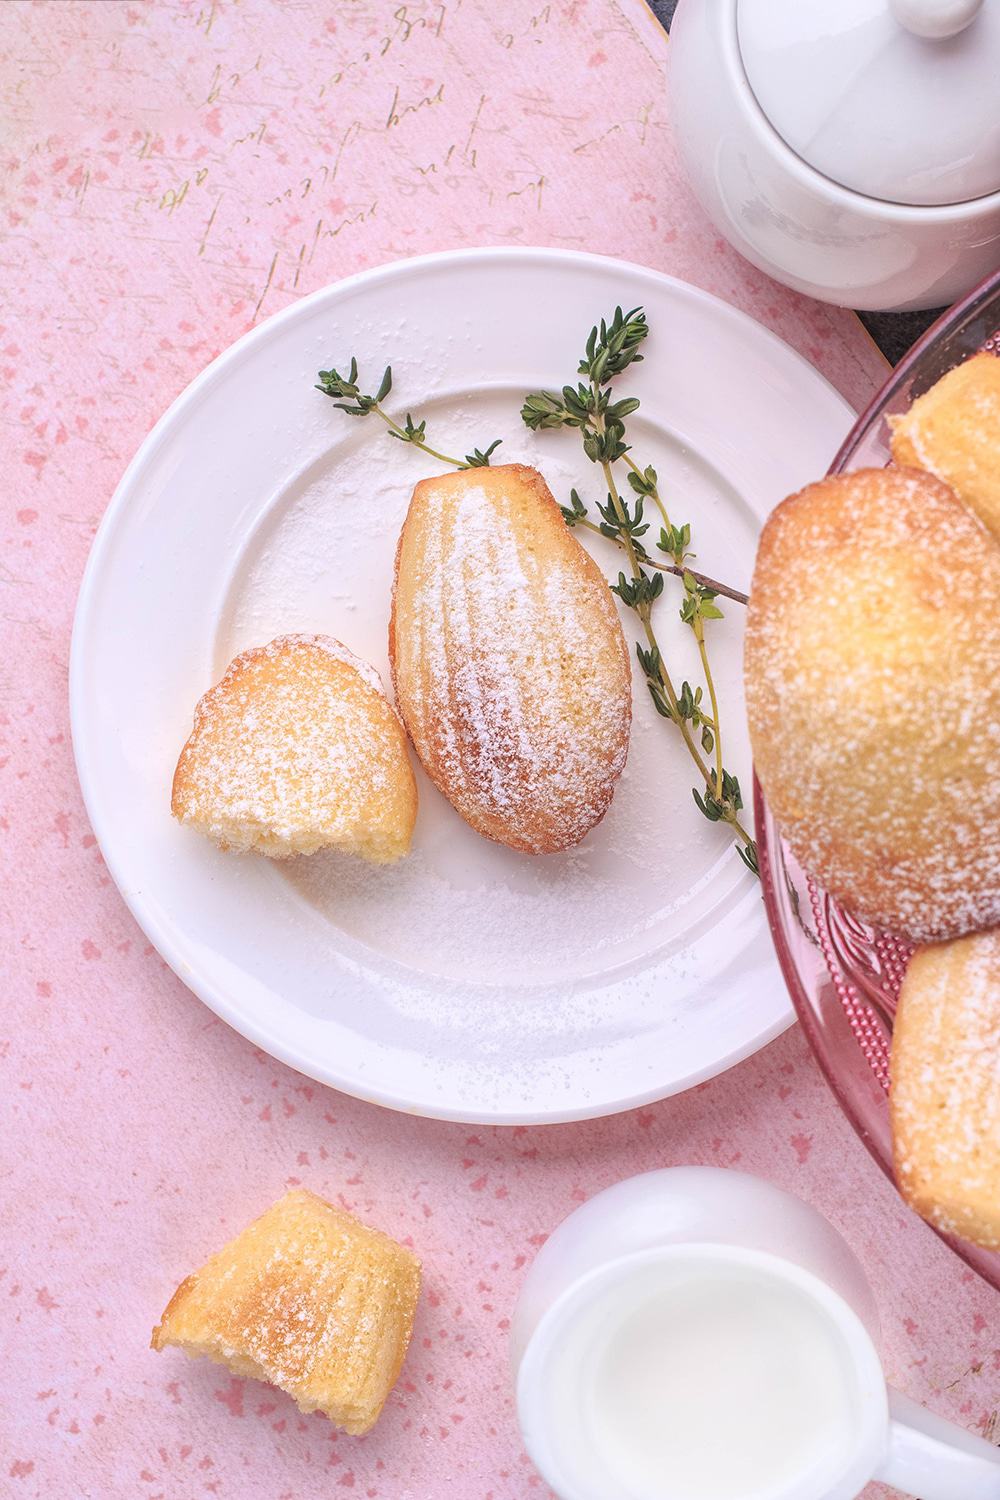 Madeleines Are Enchanting French Tea Cakes You'll Fall In Love With | Cooking Clue